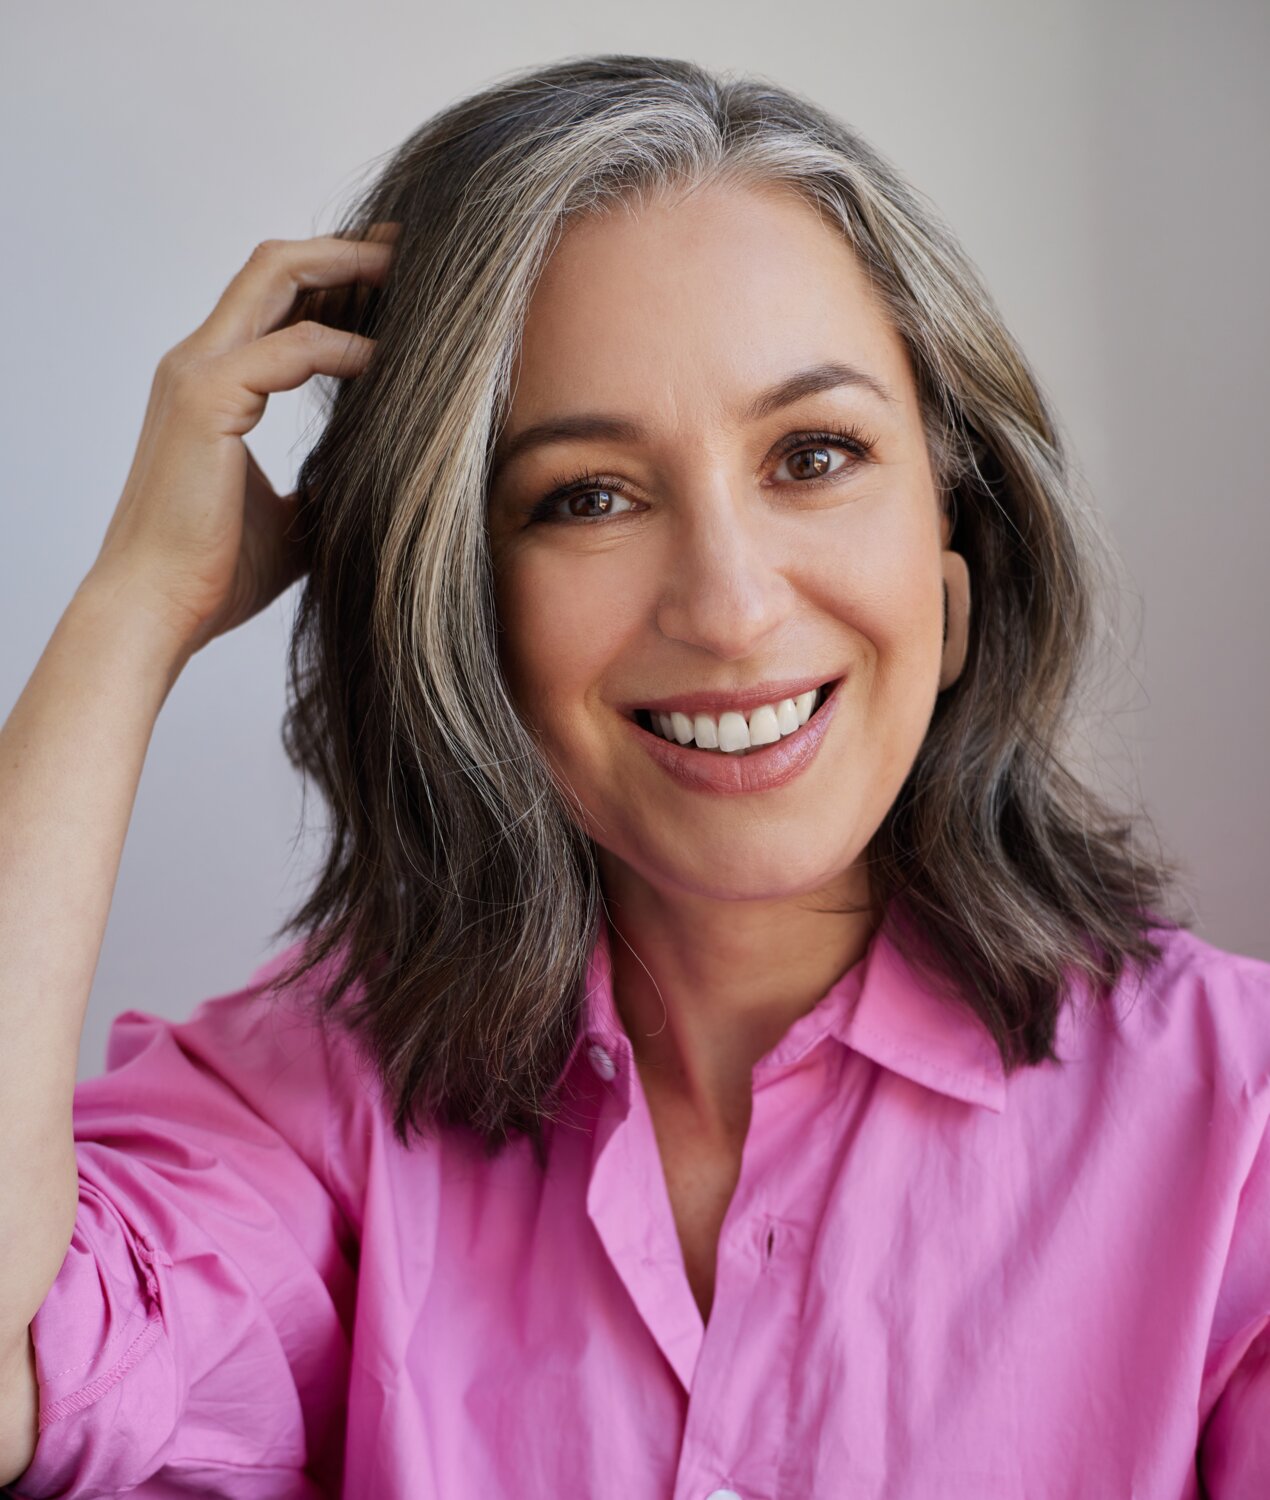 Manoush Zomorodi is an award-winning journalist, founder of Stable Genius Productions and host of NPR's TED Radio Hour. She is also the author of “Bored and Brilliant: How Spacing Out Can Unlock Your Most Creative Self.” (Photo by Tory Williams/NPR)